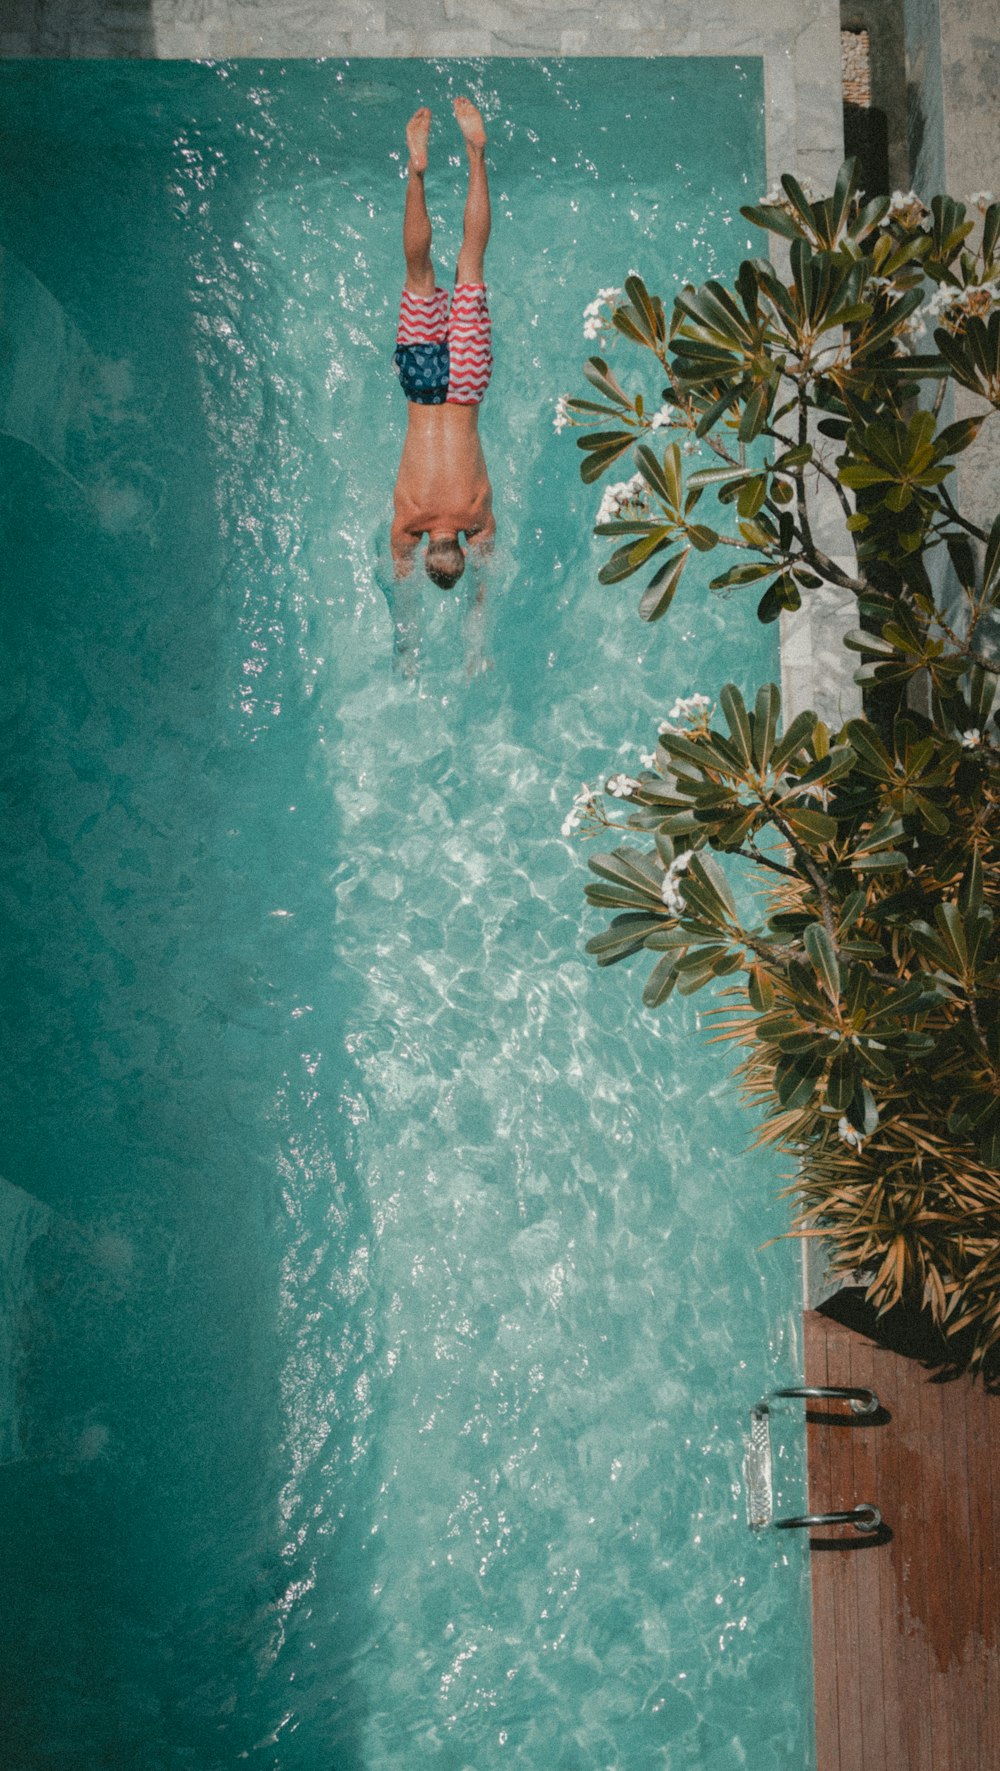 high angle photography of man diving towards the pool